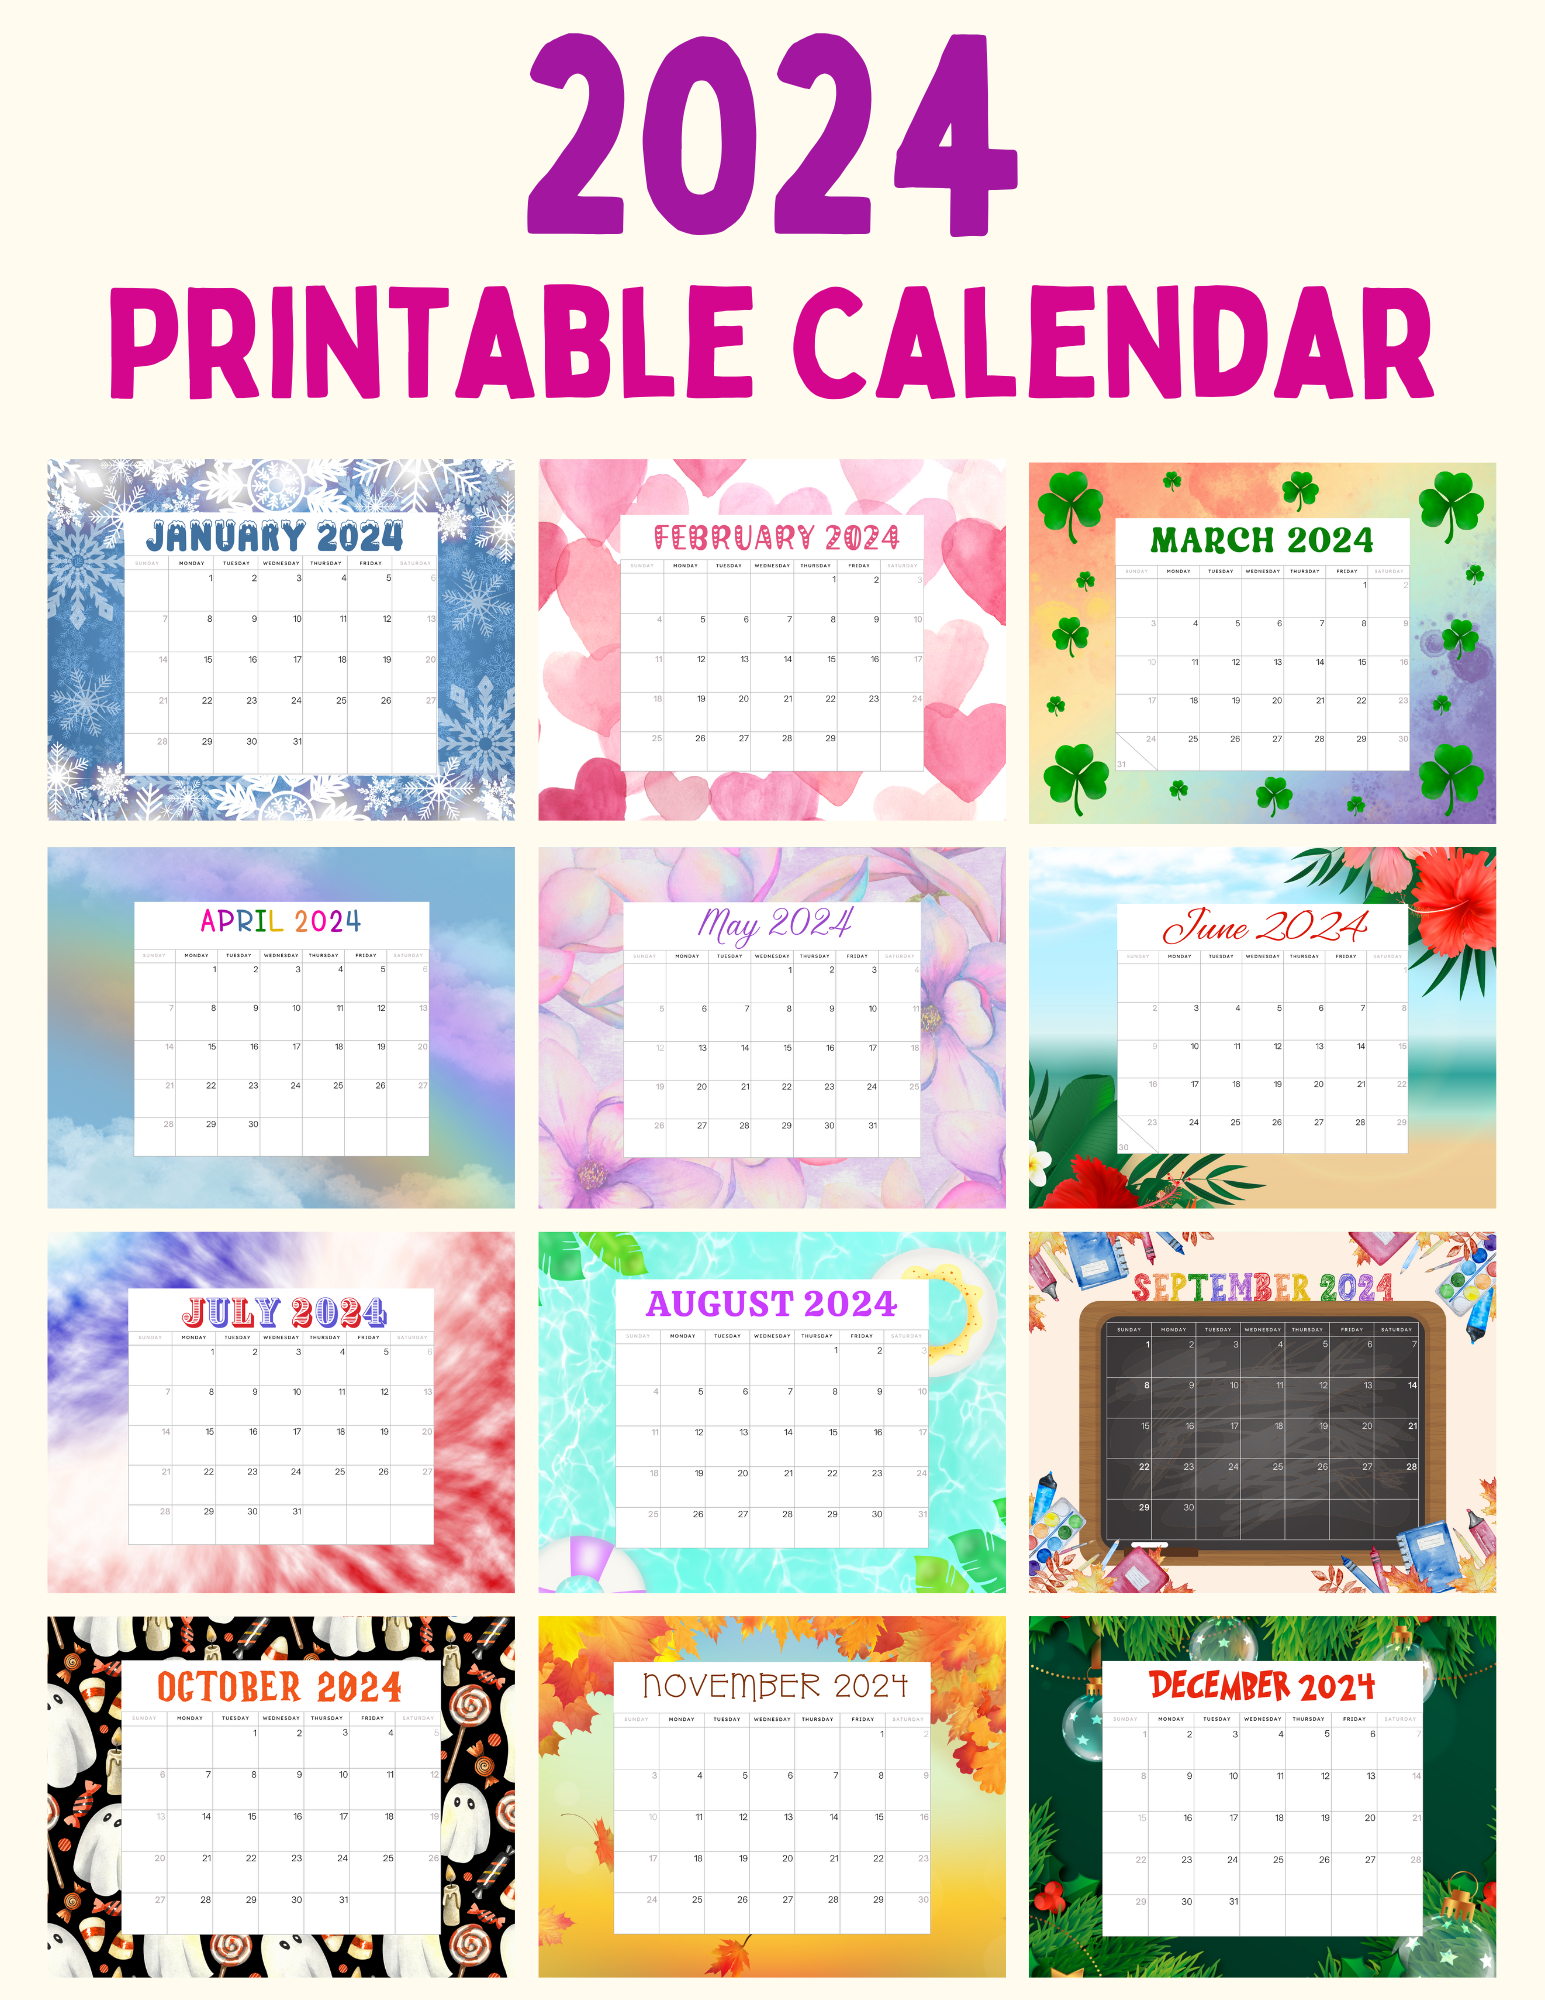 Printable 2024 Monthly Calendar | Free Printable Calendar Monthly regarding Free Printable Calendar 2024 Cute With Holidays